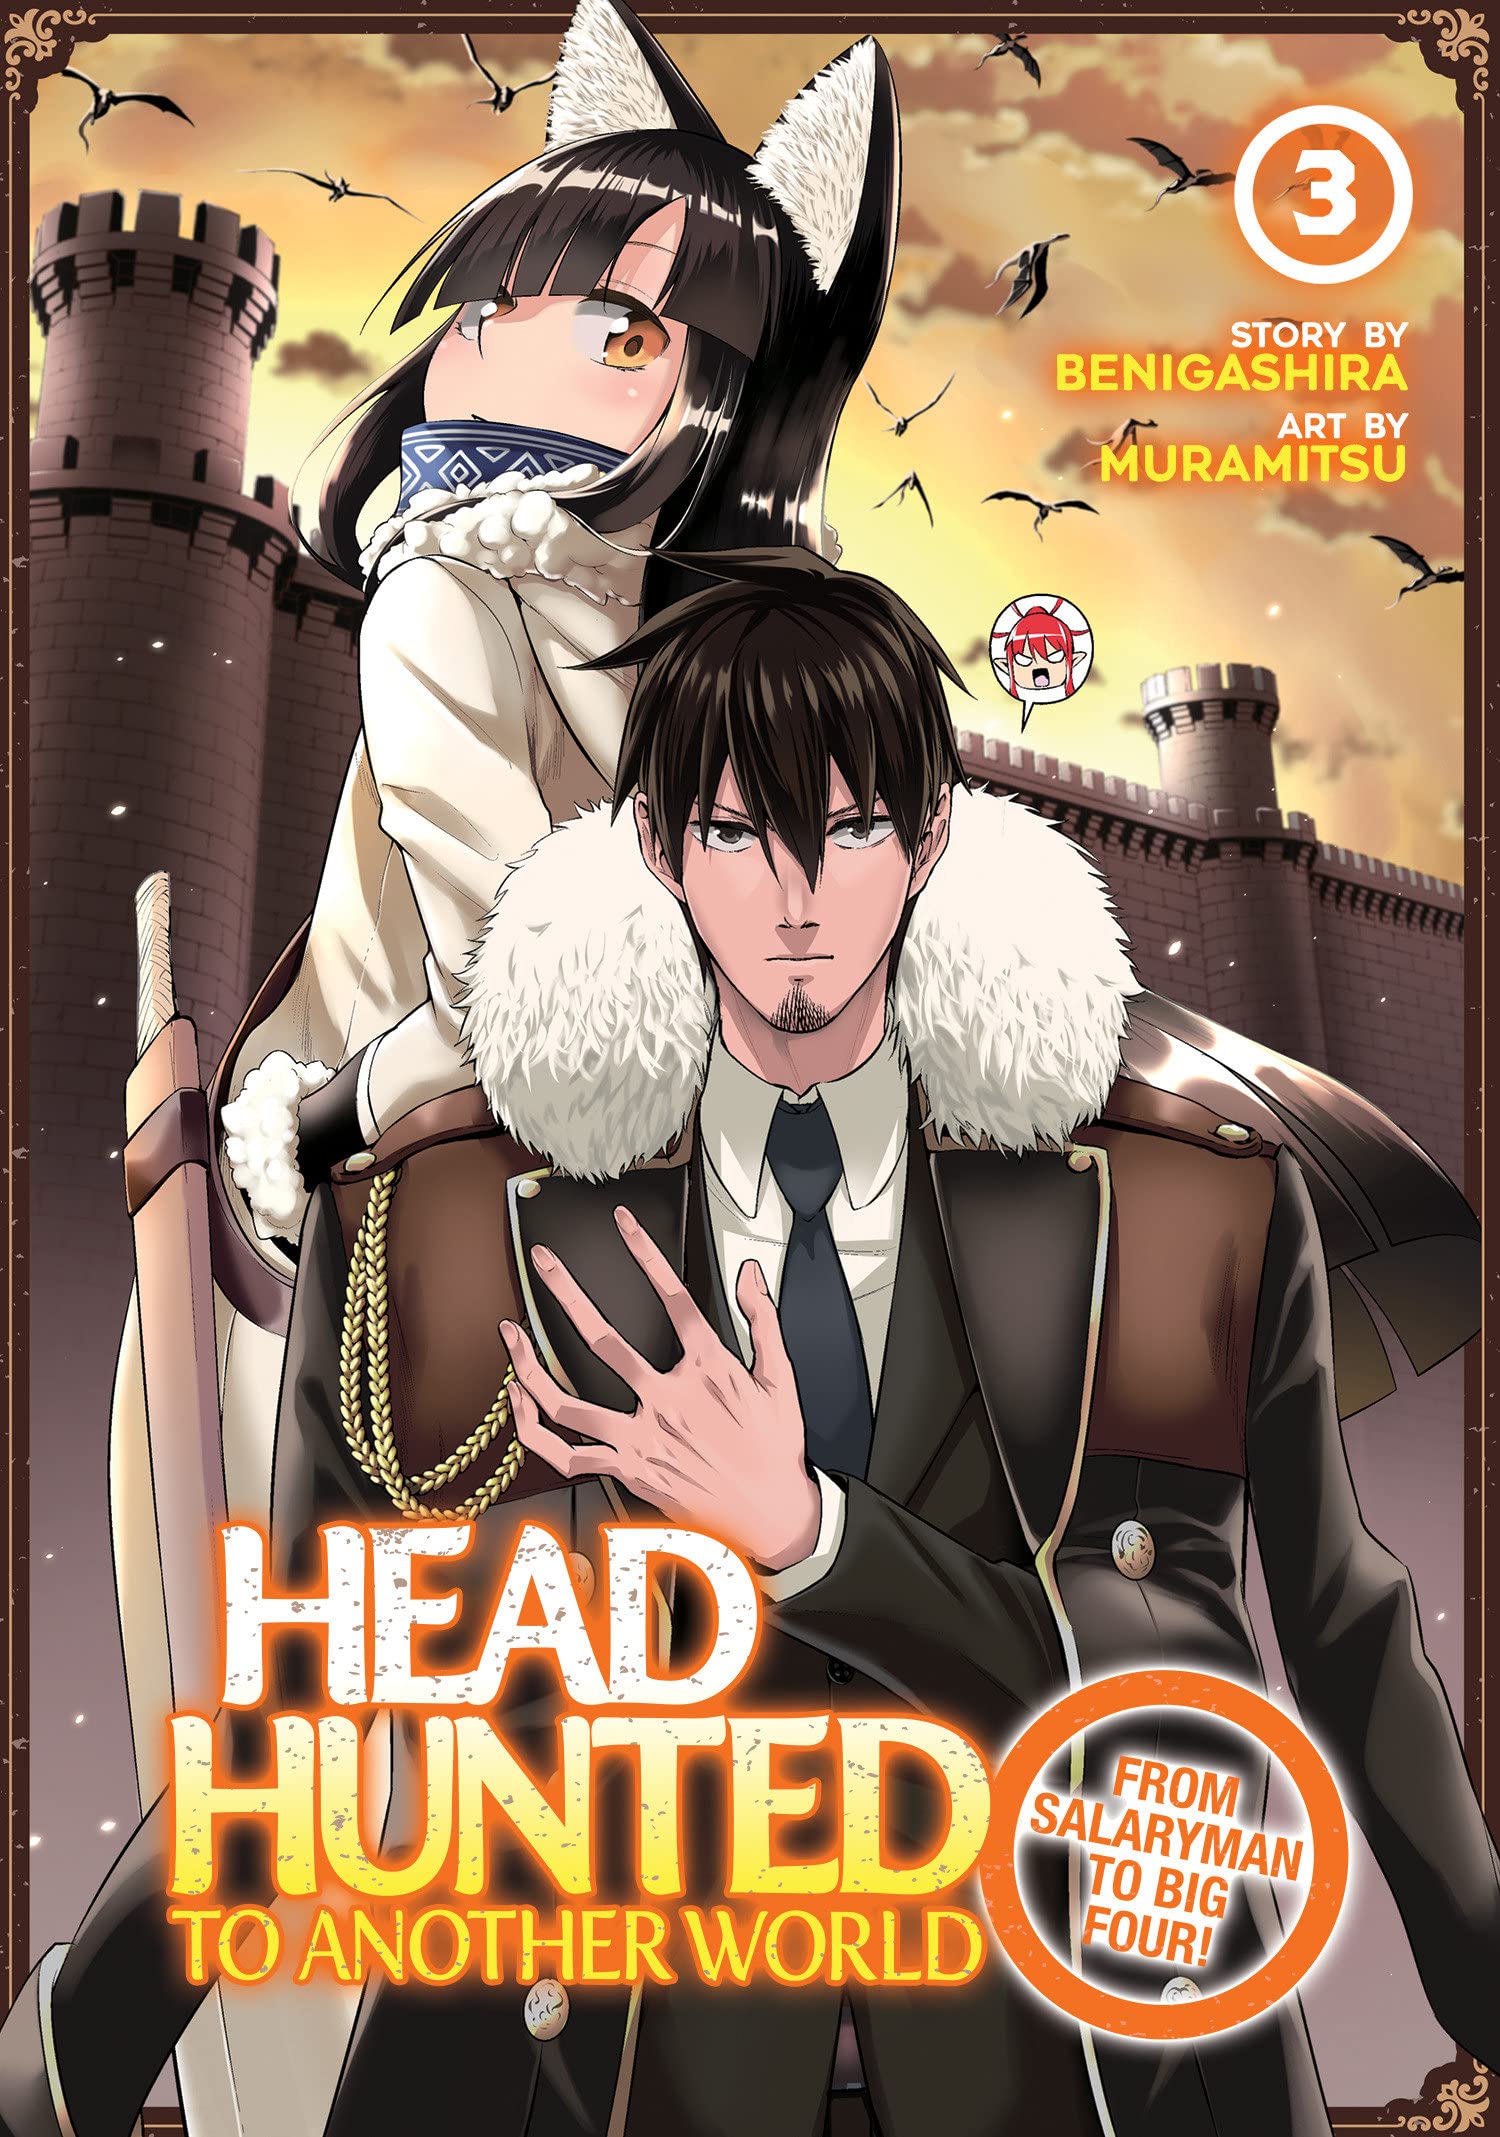 Headhunted to Another World: From Salaryman to Big Four! Vol. 03